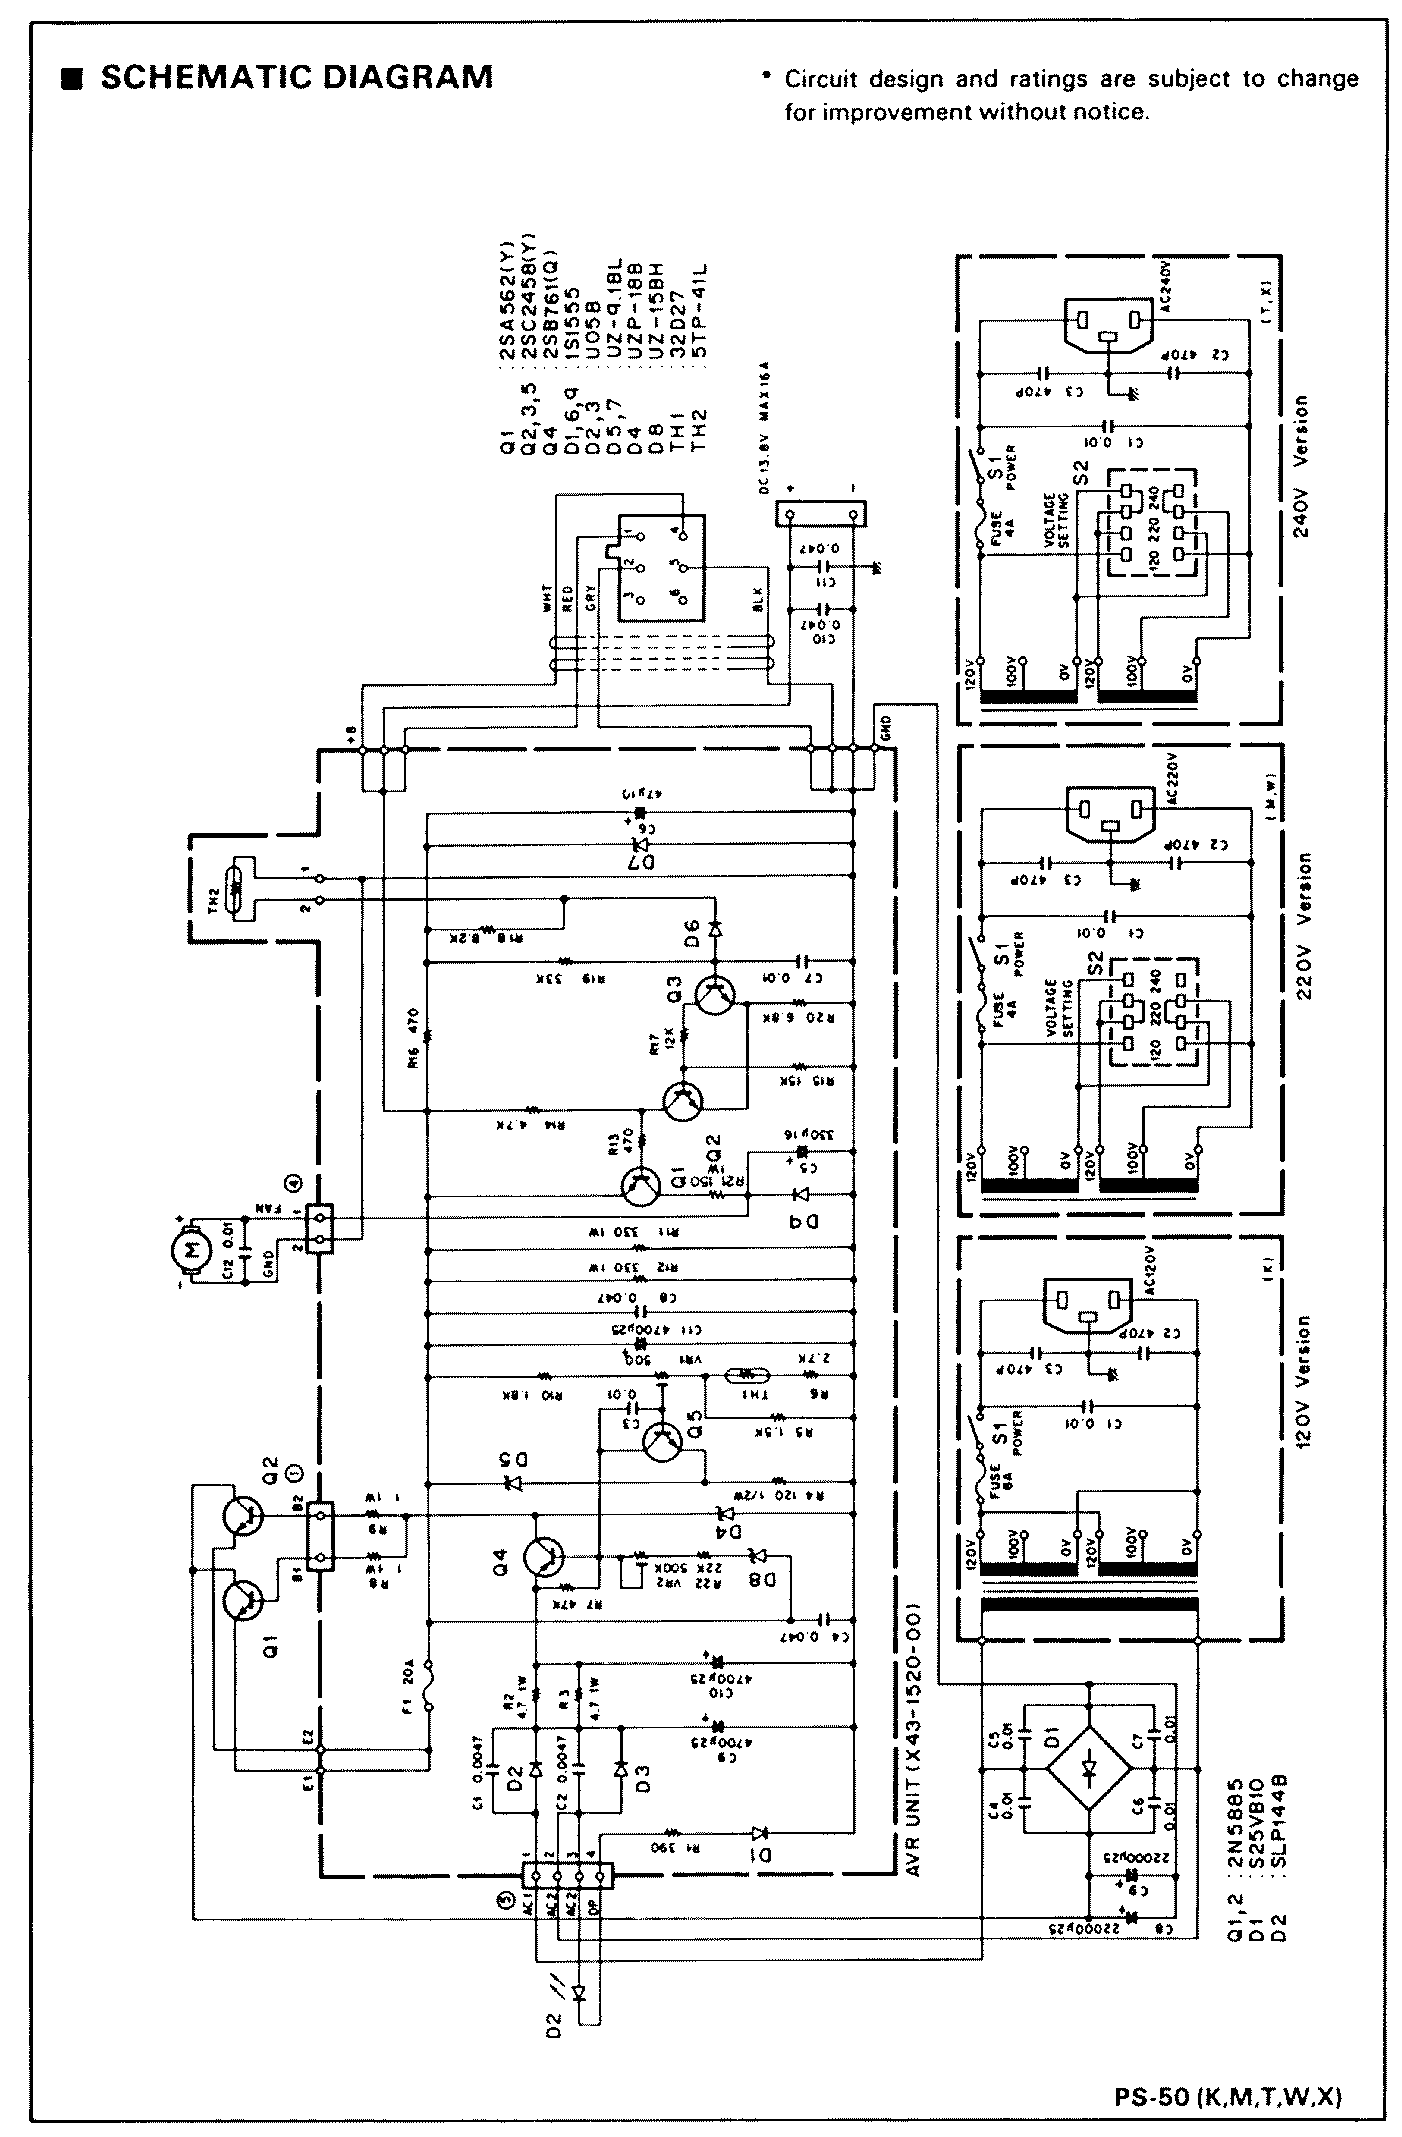   kenwood ps-50 power supply Schematic Only